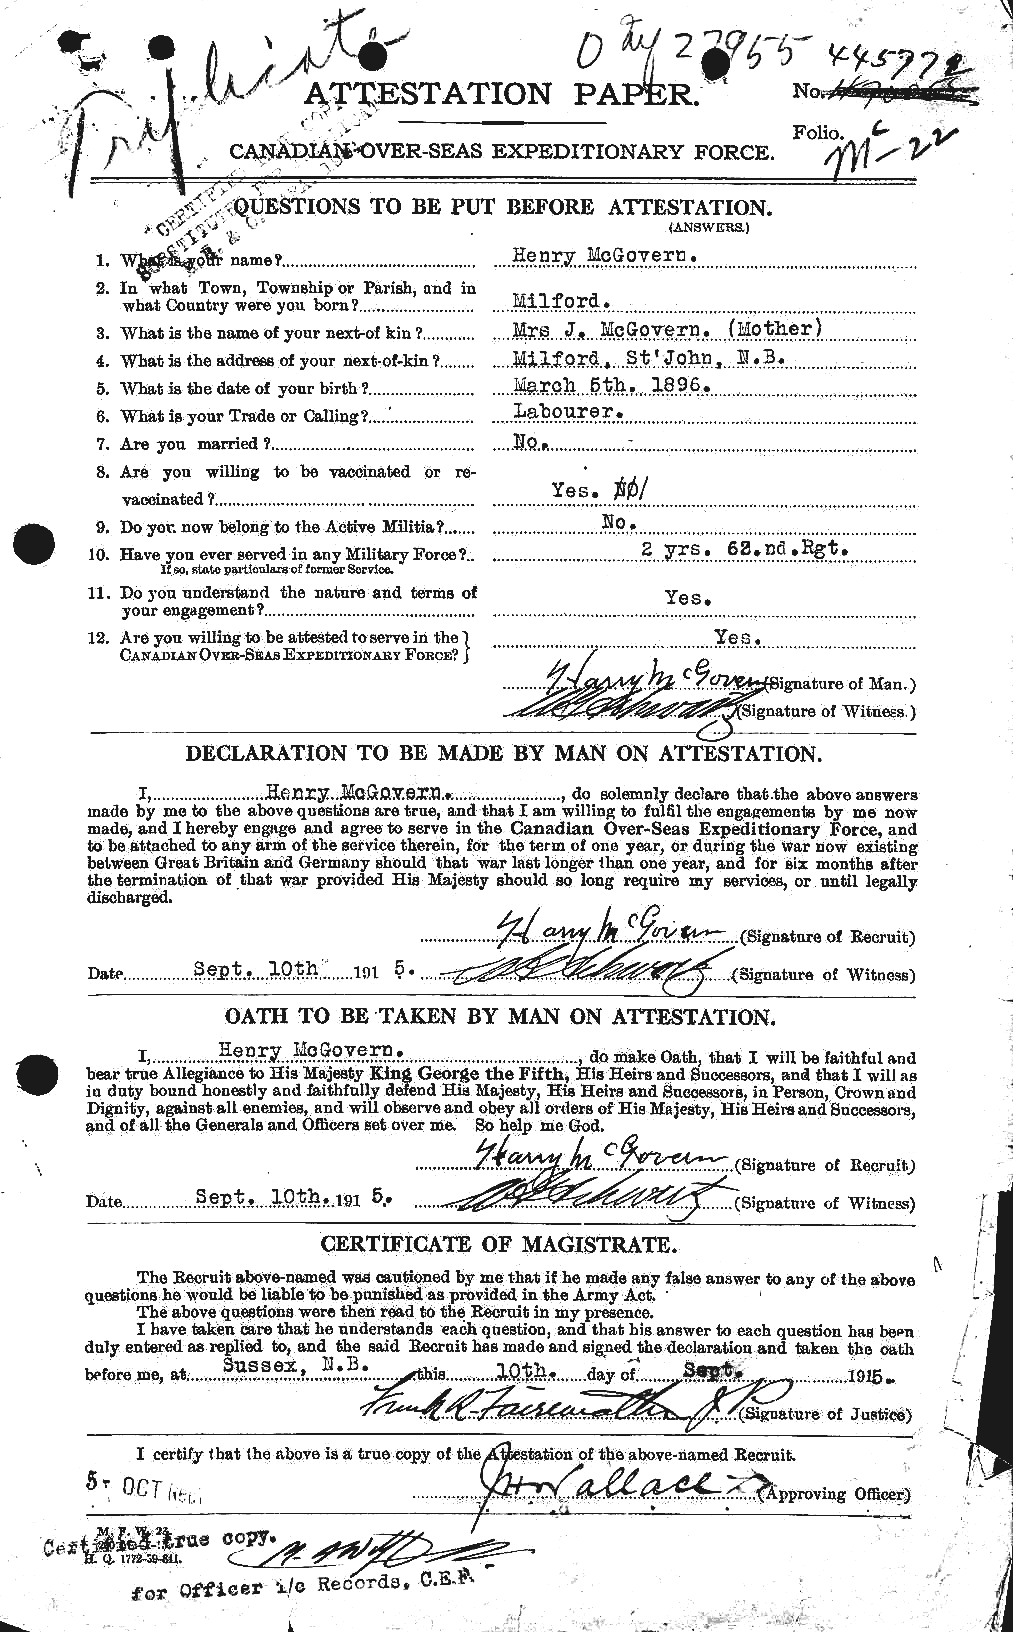 Personnel Records of the First World War - CEF 528560a